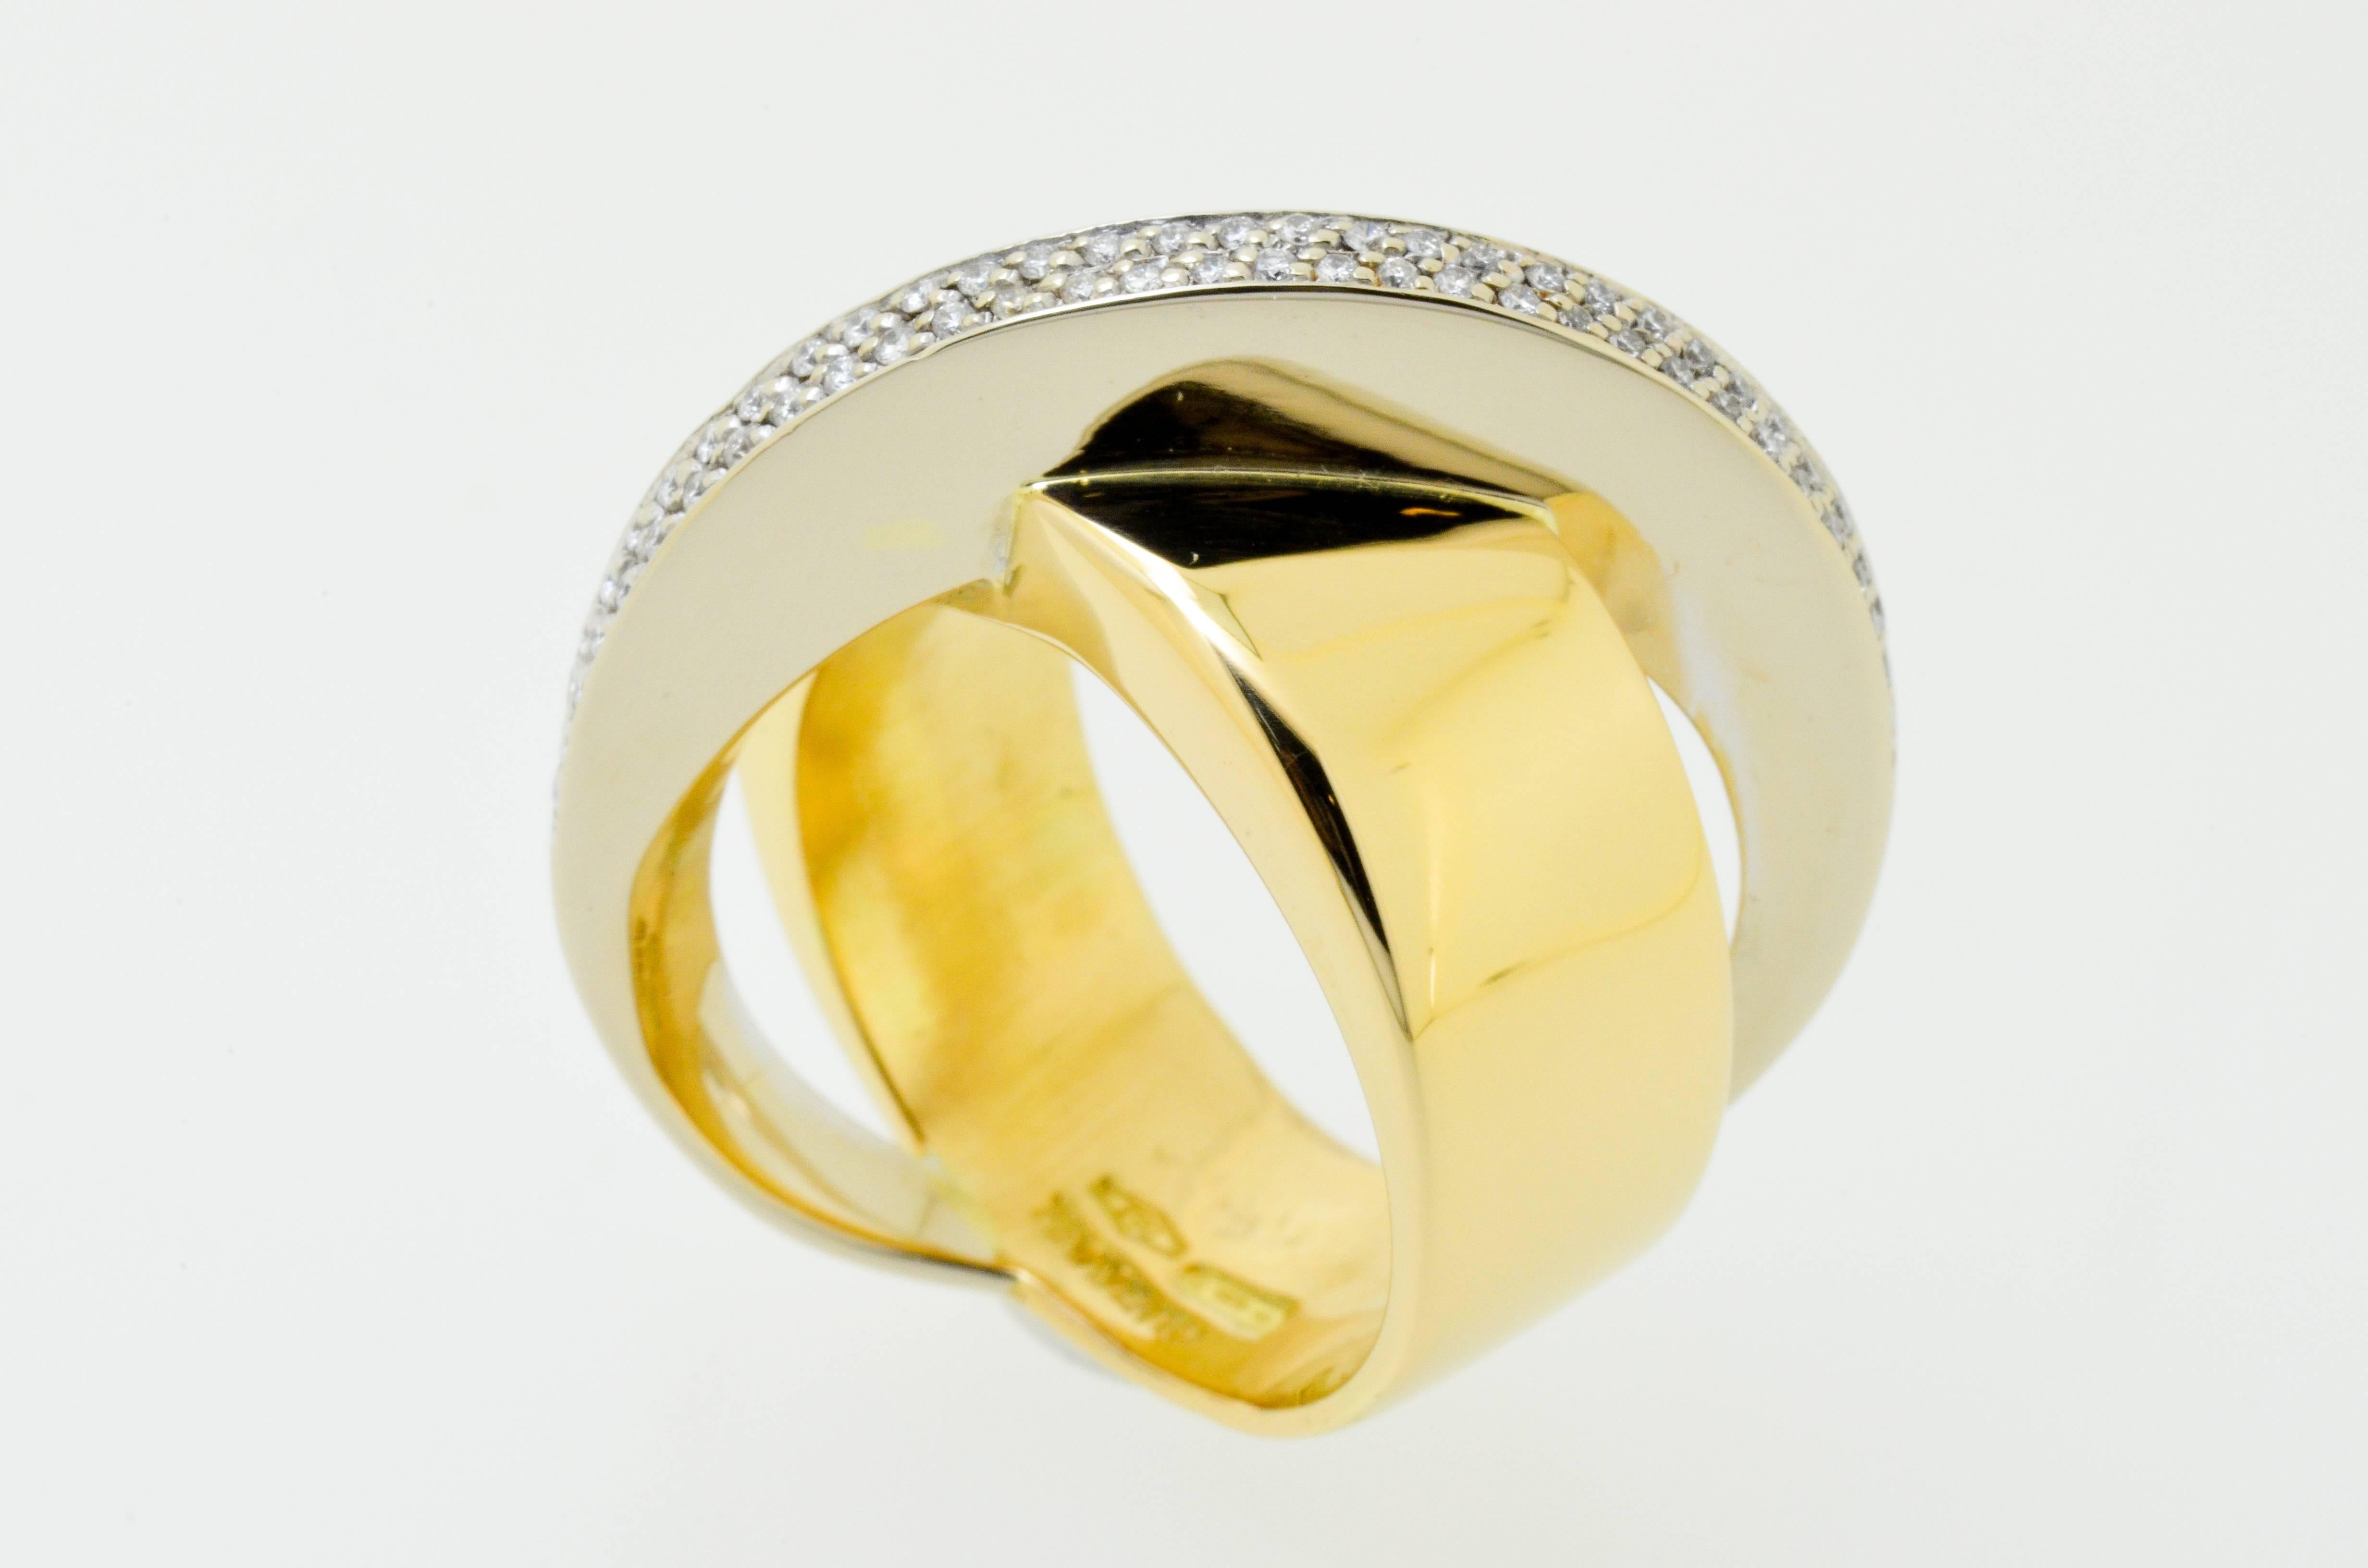 White & Yellow Gold Diamond Pesavento Ring In Excellent Condition For Sale In Fuengirola, Malaga